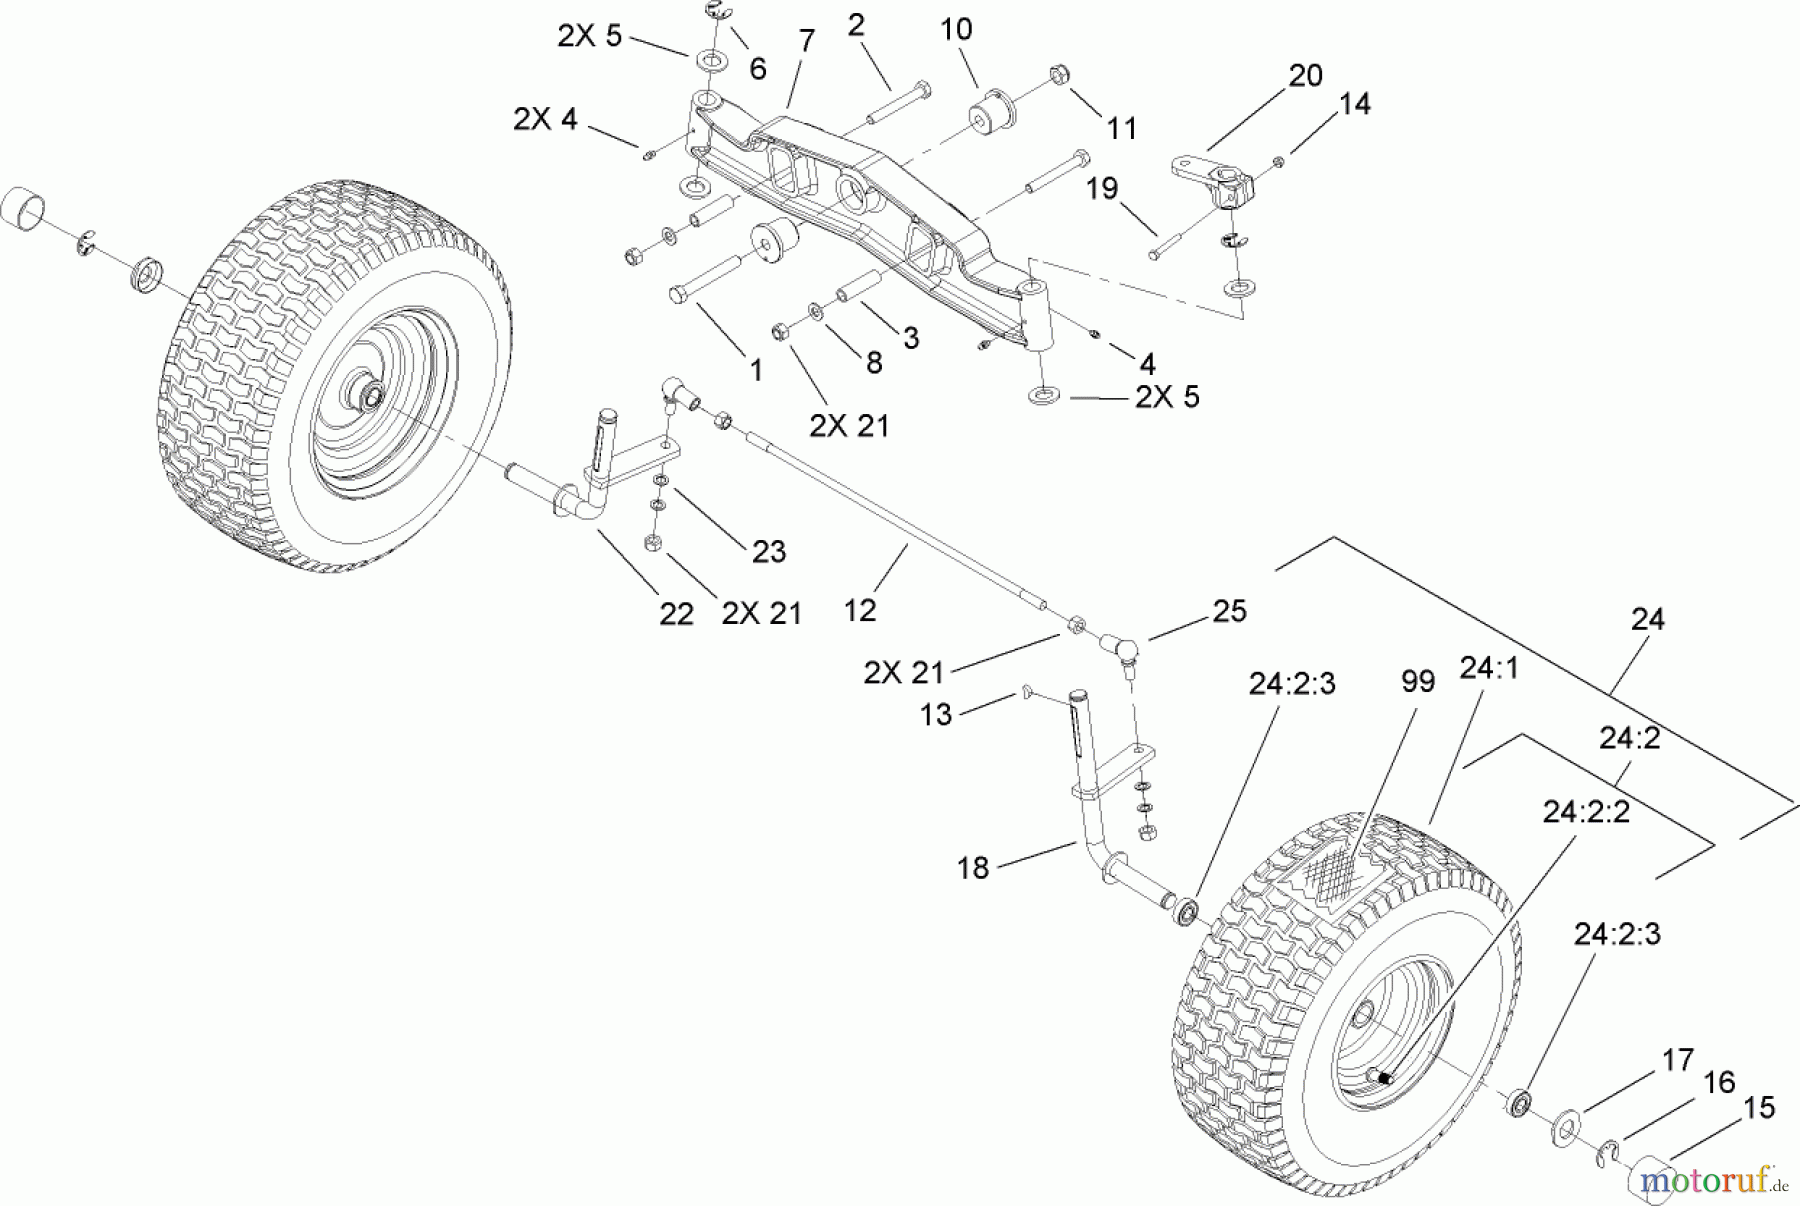  Toro Neu Mowers, Lawn & Garden Tractor Seite 1 74582 (DH 210) - Toro DH 210 Lawn Tractor, 2007 (270000001-270999999) FRONT AXLE ASSEMBLY